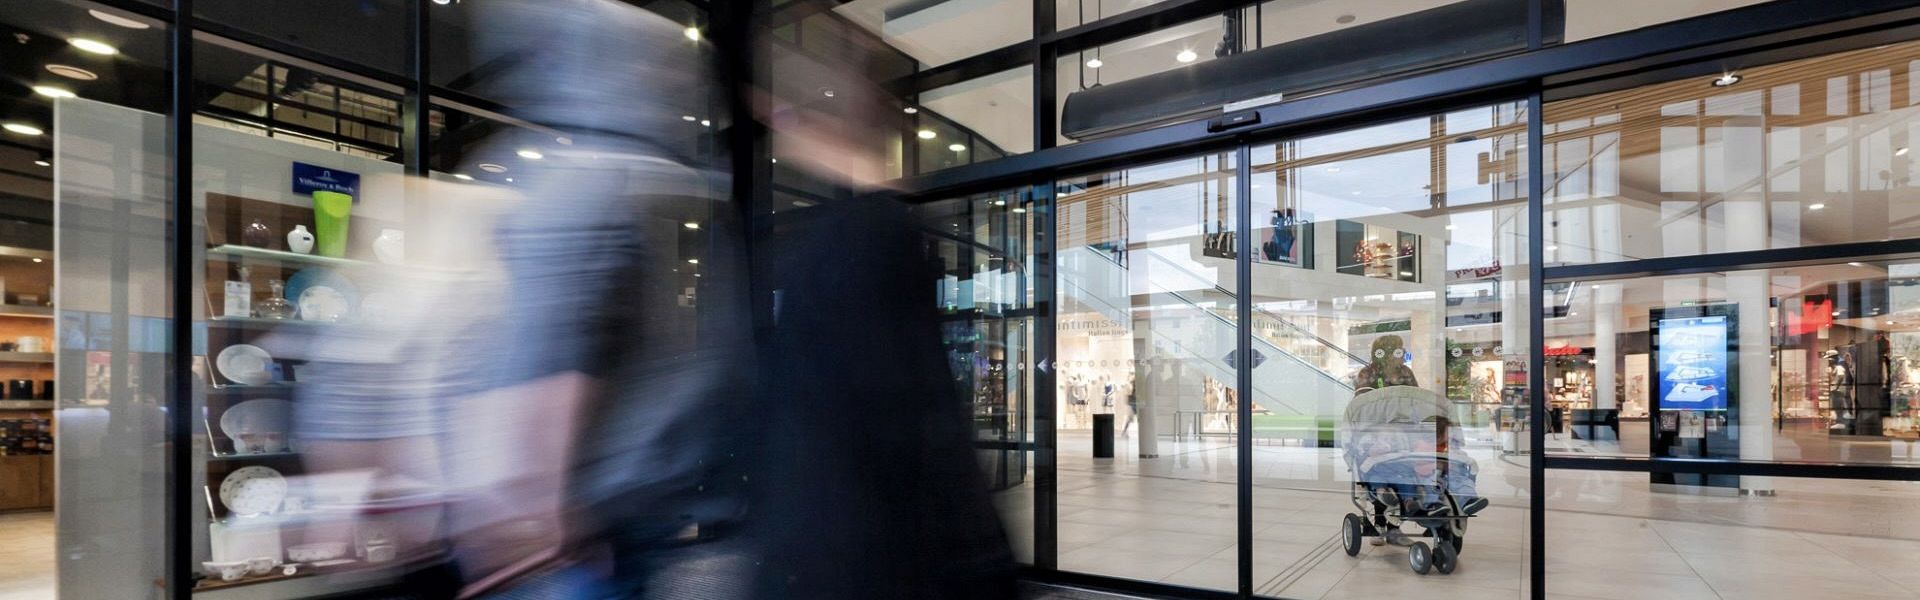 Myth no 4: Automatic doors are not cost-effective